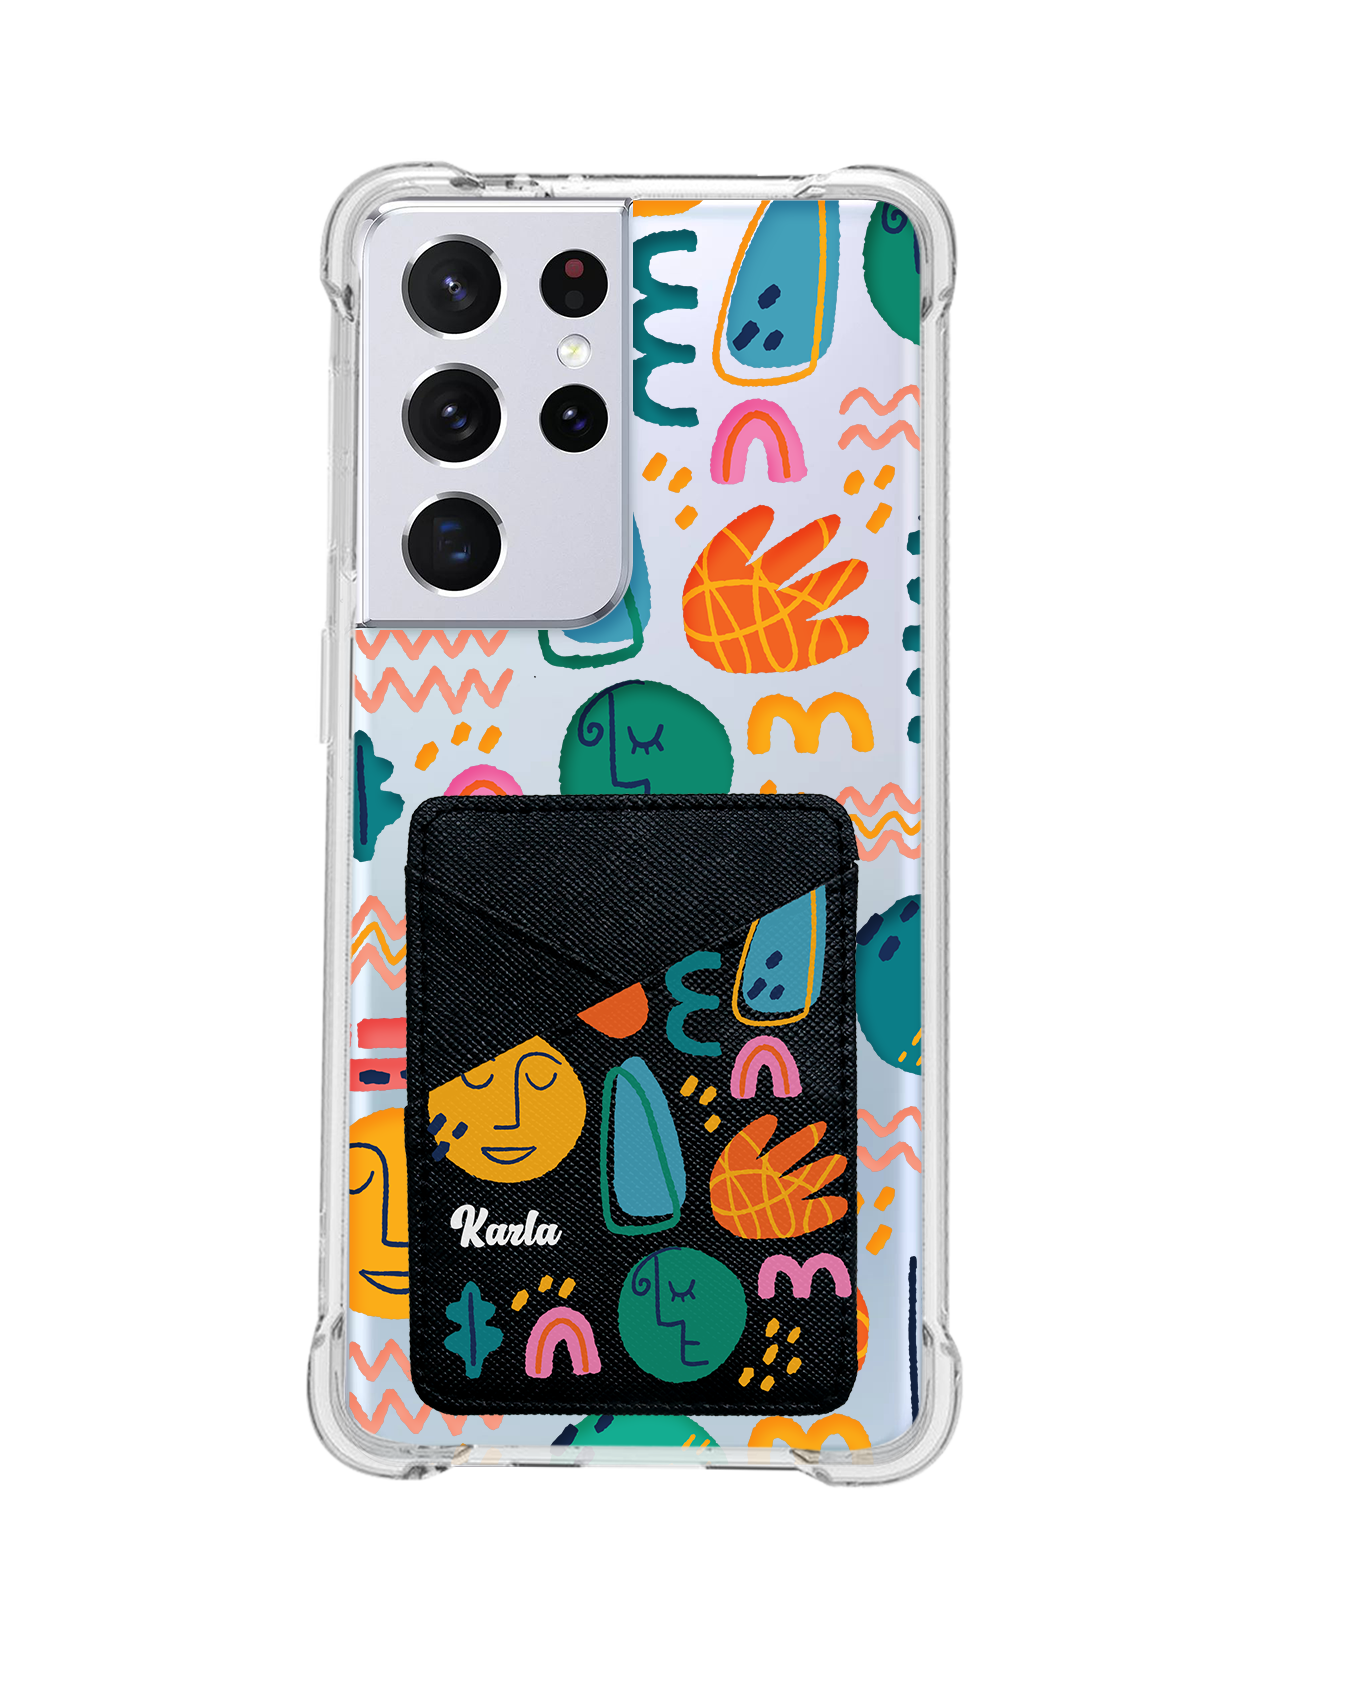 Android Phone Wallet Case - Silent Art